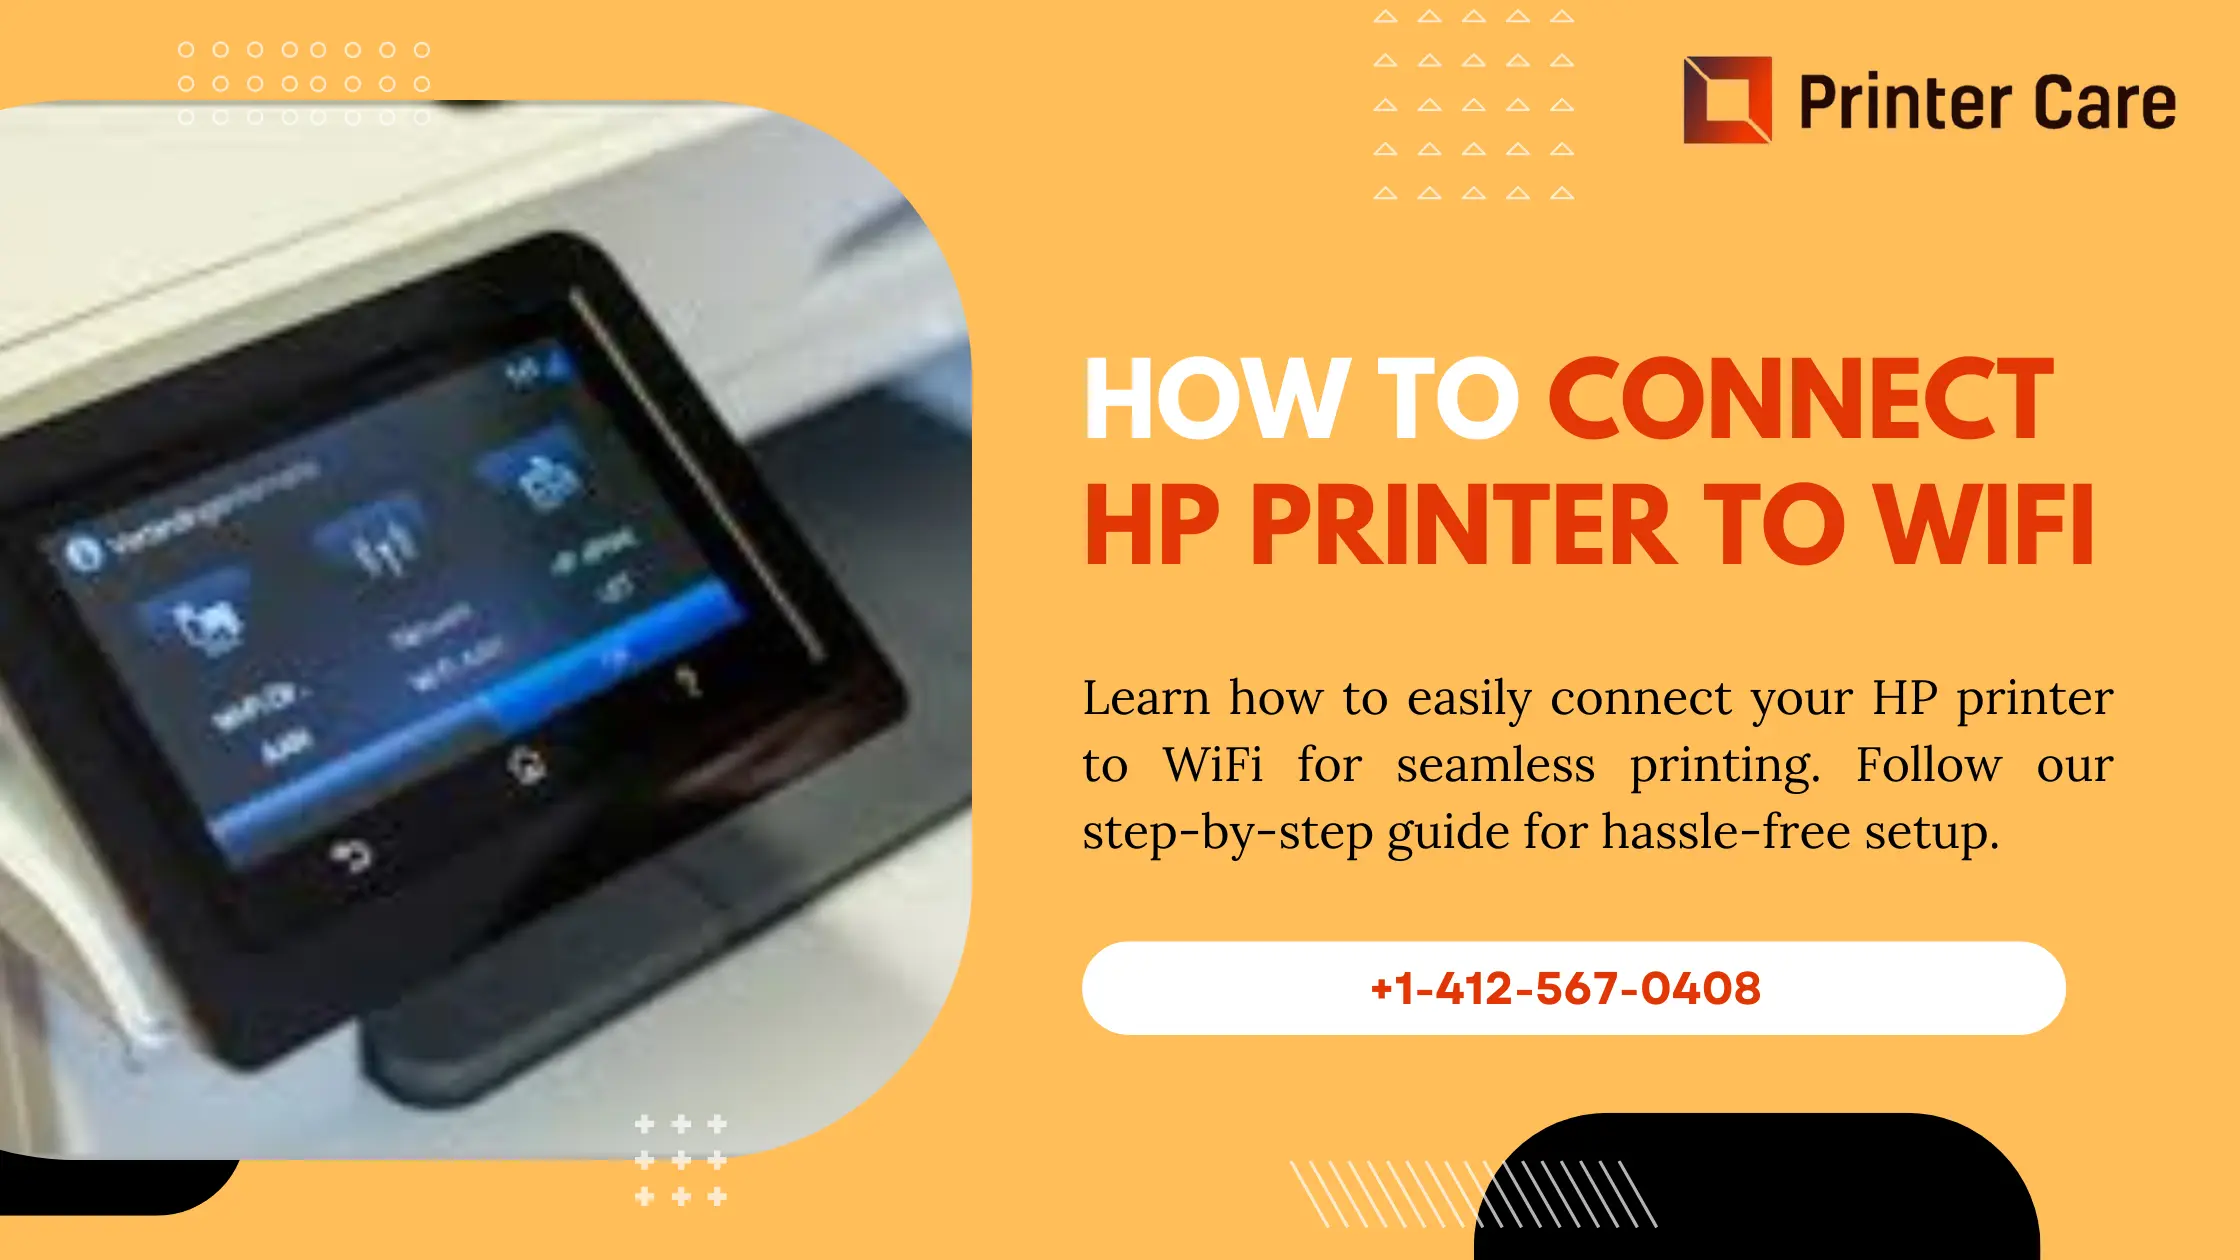 How To Connect HP Printer To WiFi